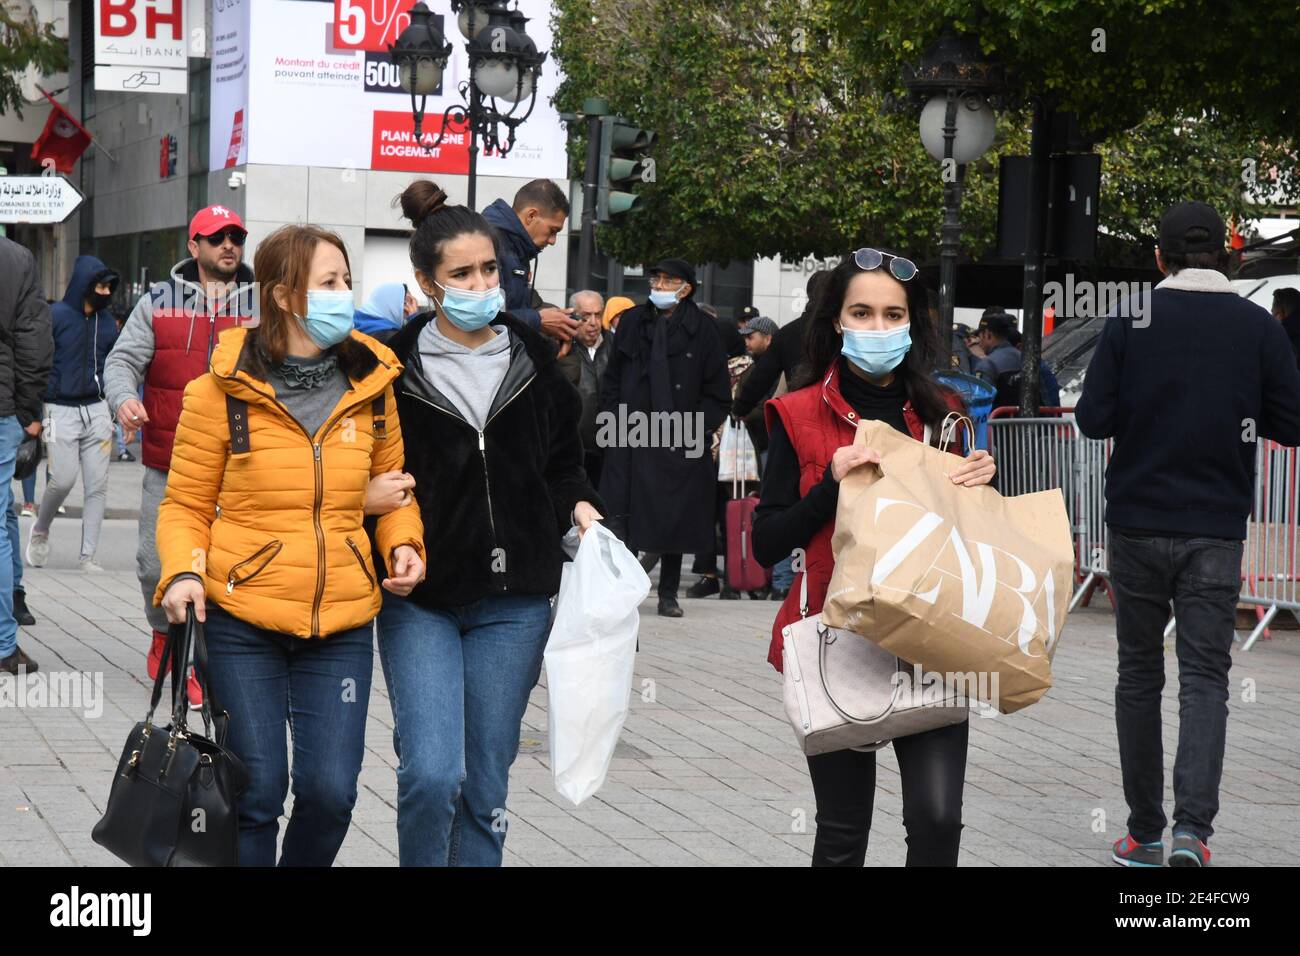 Tunis, Tunisia. 23rd Jan, 2021. People wearing face masks walk on a street in Tunis, Tunisia, on Jan. 23, 2021. Tunisian Health Ministry on Saturday night reported 2,041 new COVID-19 cases, raising the total number of infections in the country to 195,314. Credit: Adel Ezzine/Xinhua/Alamy Live News Stock Photo